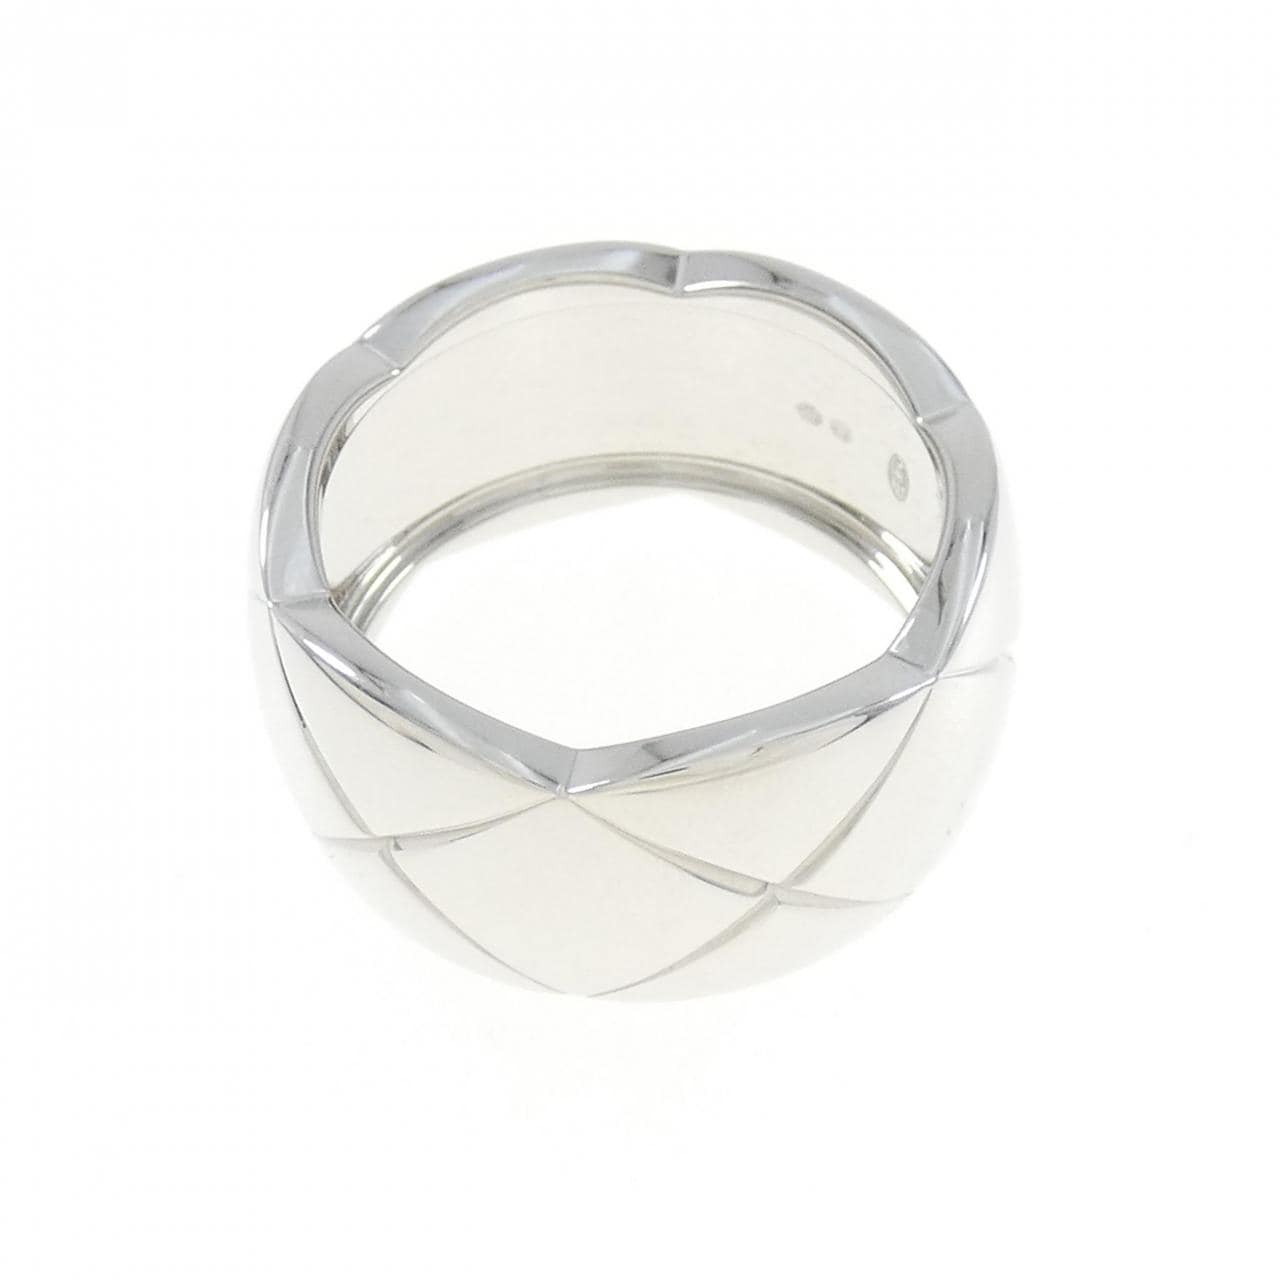 CHANEL Coco Crush Large Ring